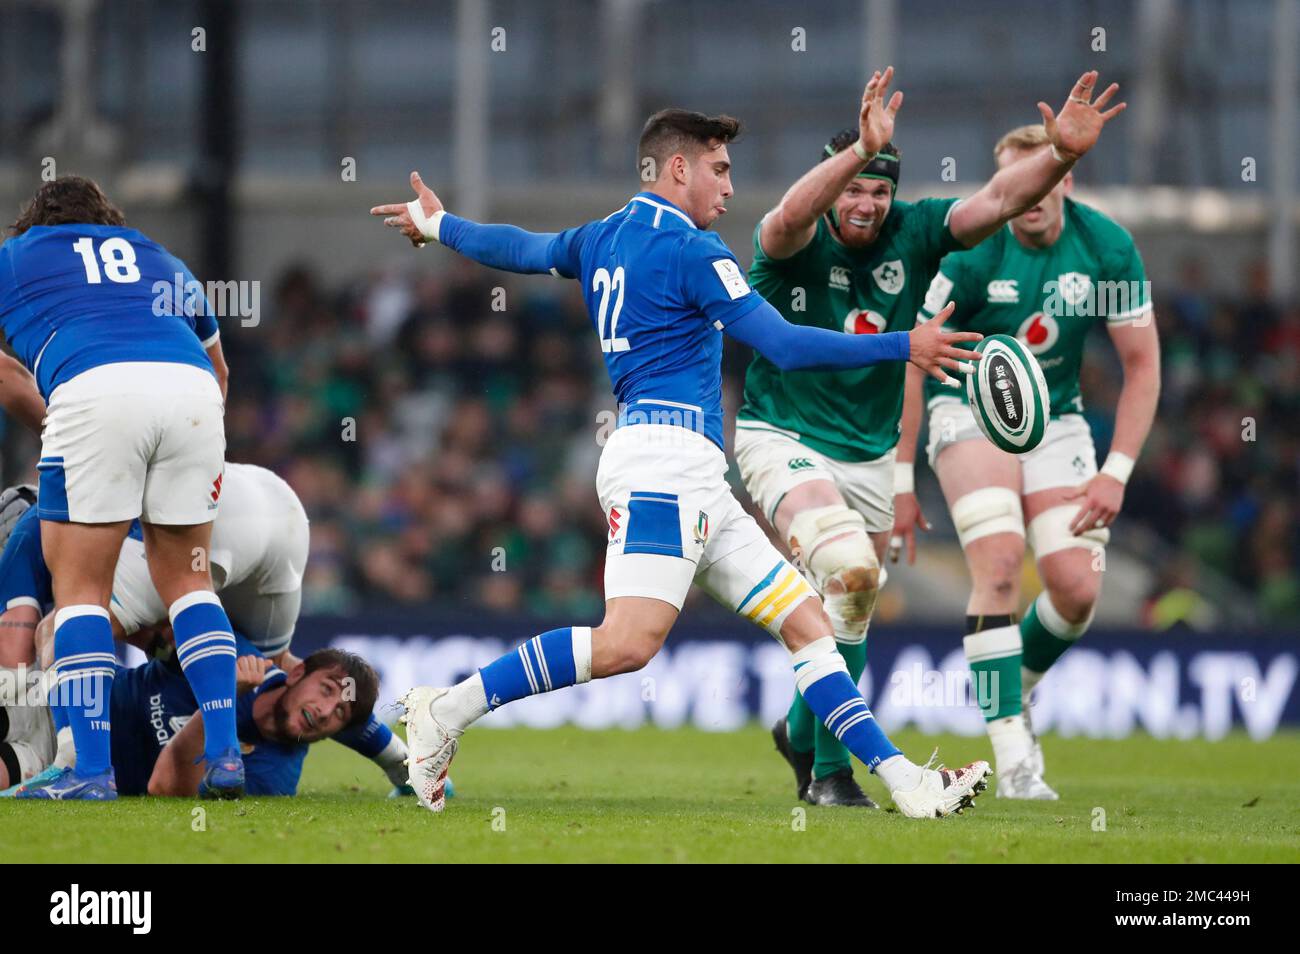 Italys Alessandro Fusco, front, kicks clear of a ruck during the Six Nations rugby union match between Ireland and Italy at the Aviva Stadium in Dublin, Ireland, Sunday, Feb